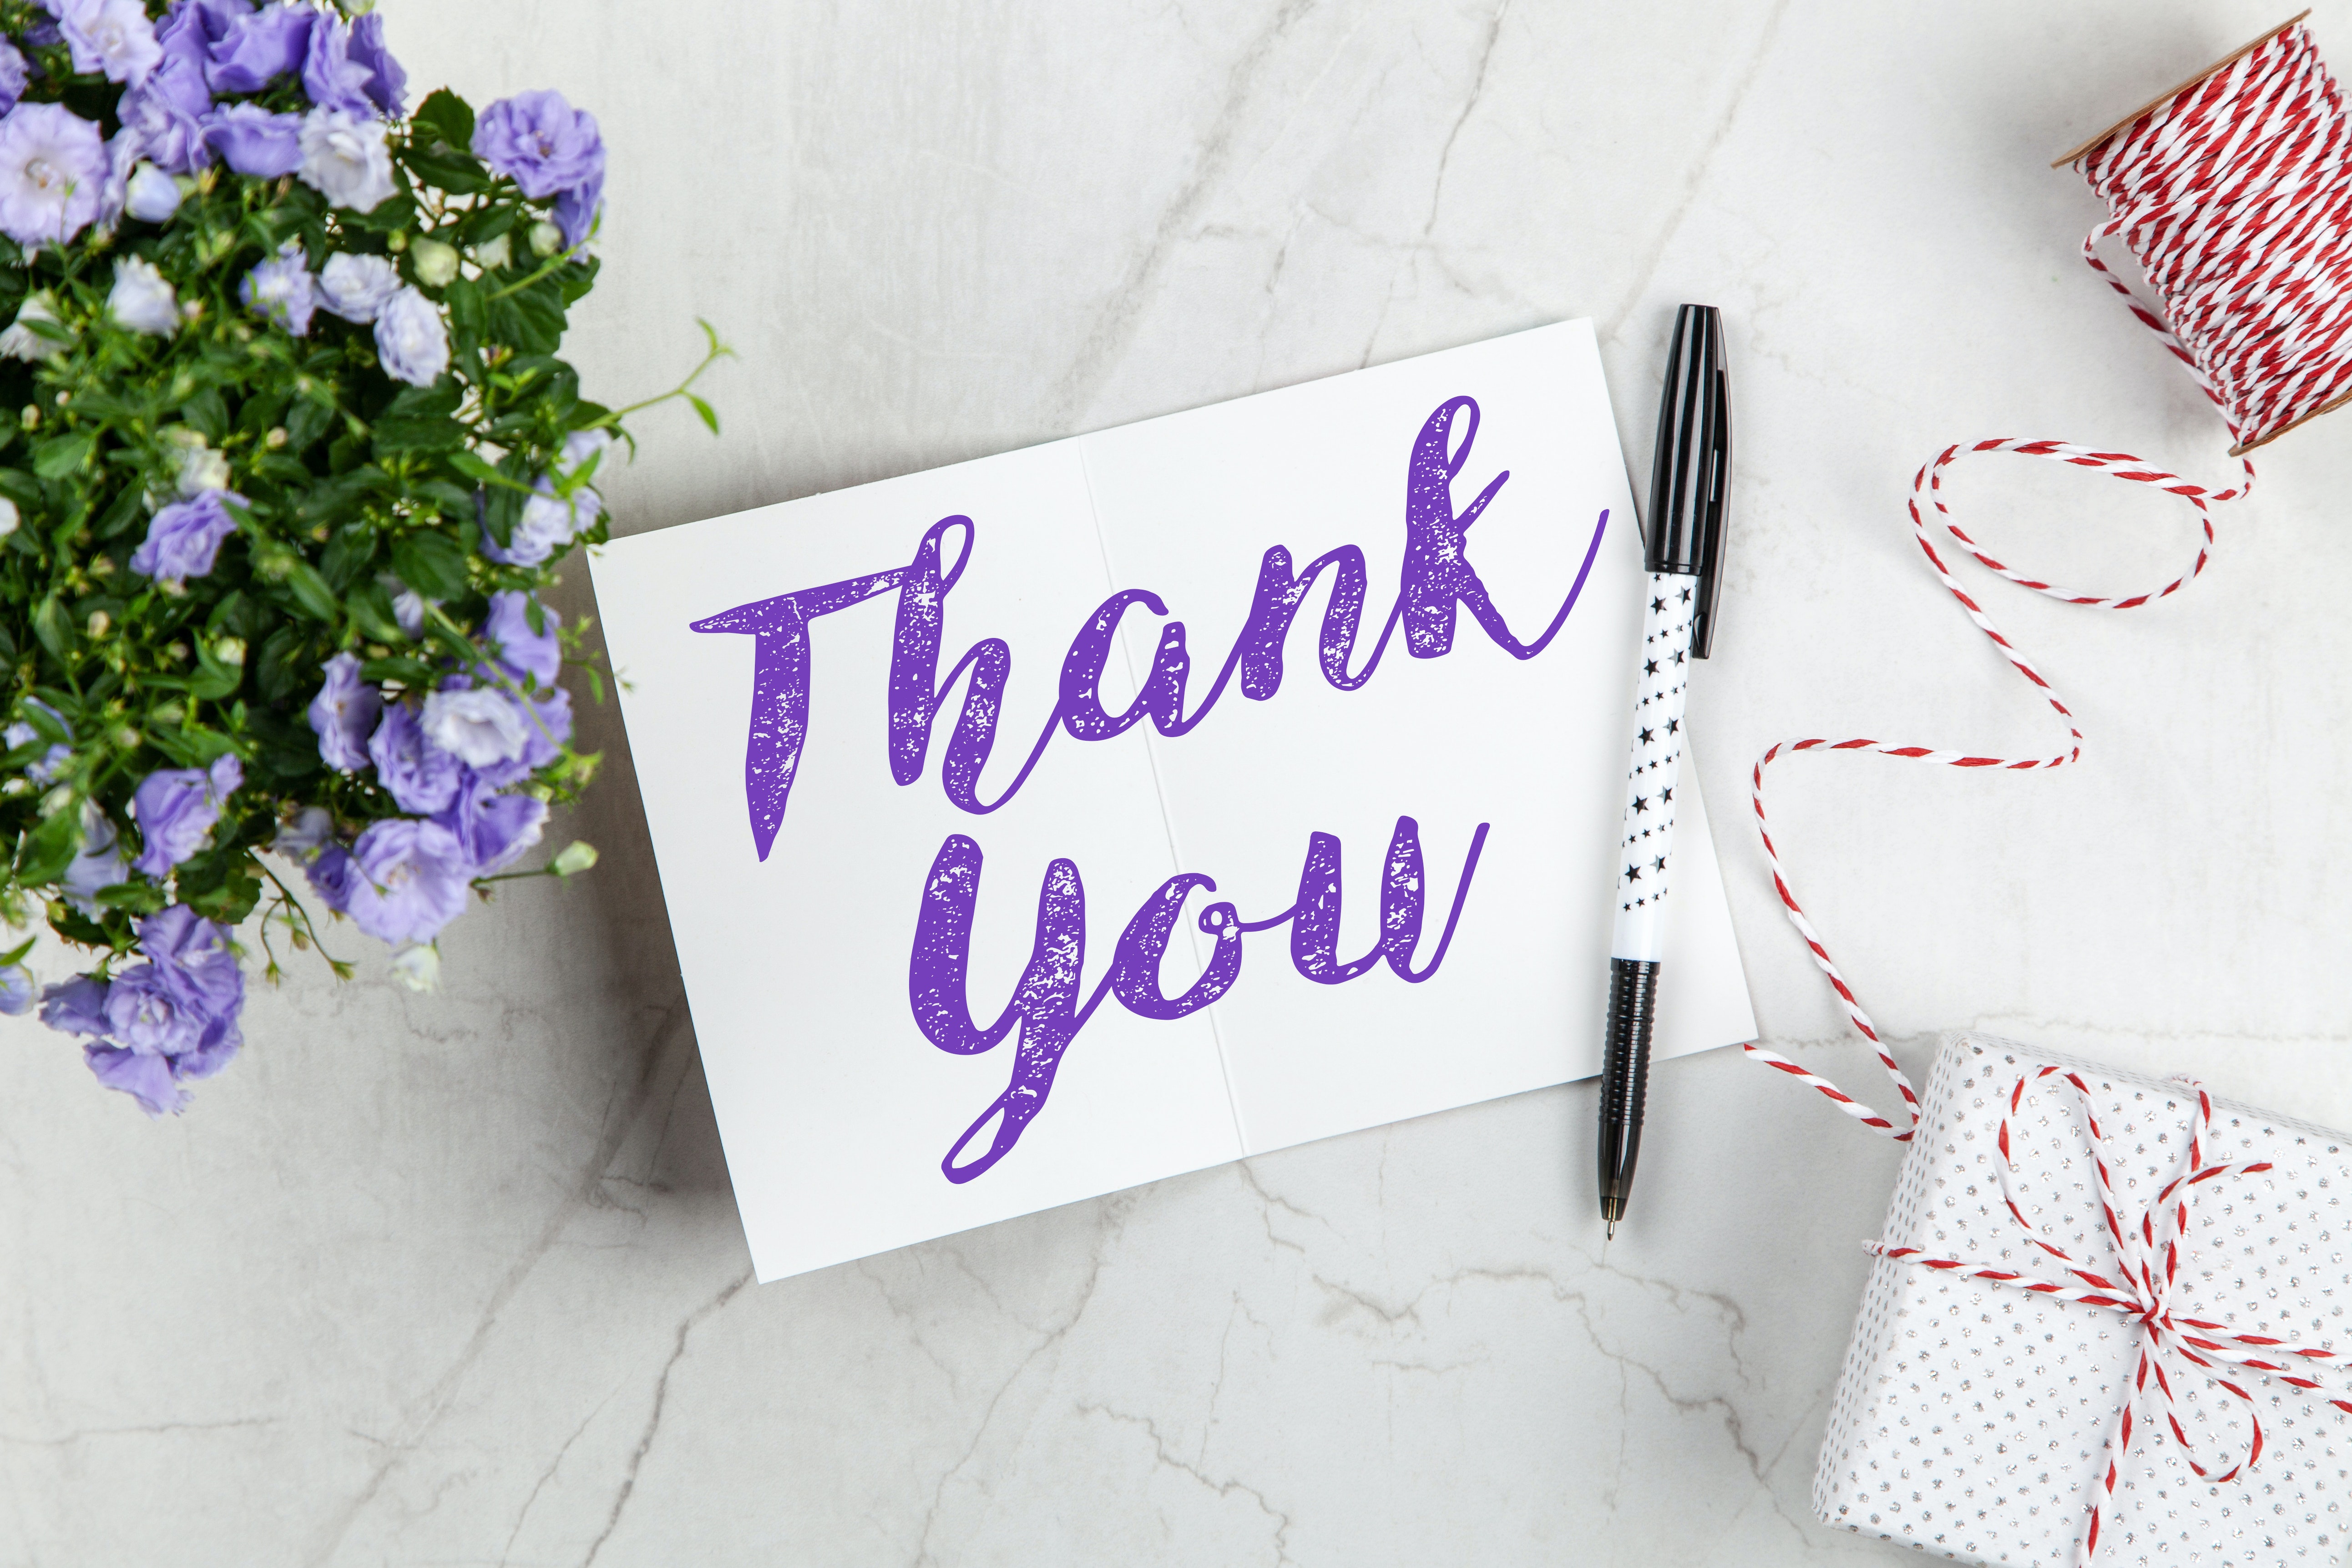 Picture of a thank you note and flowers.